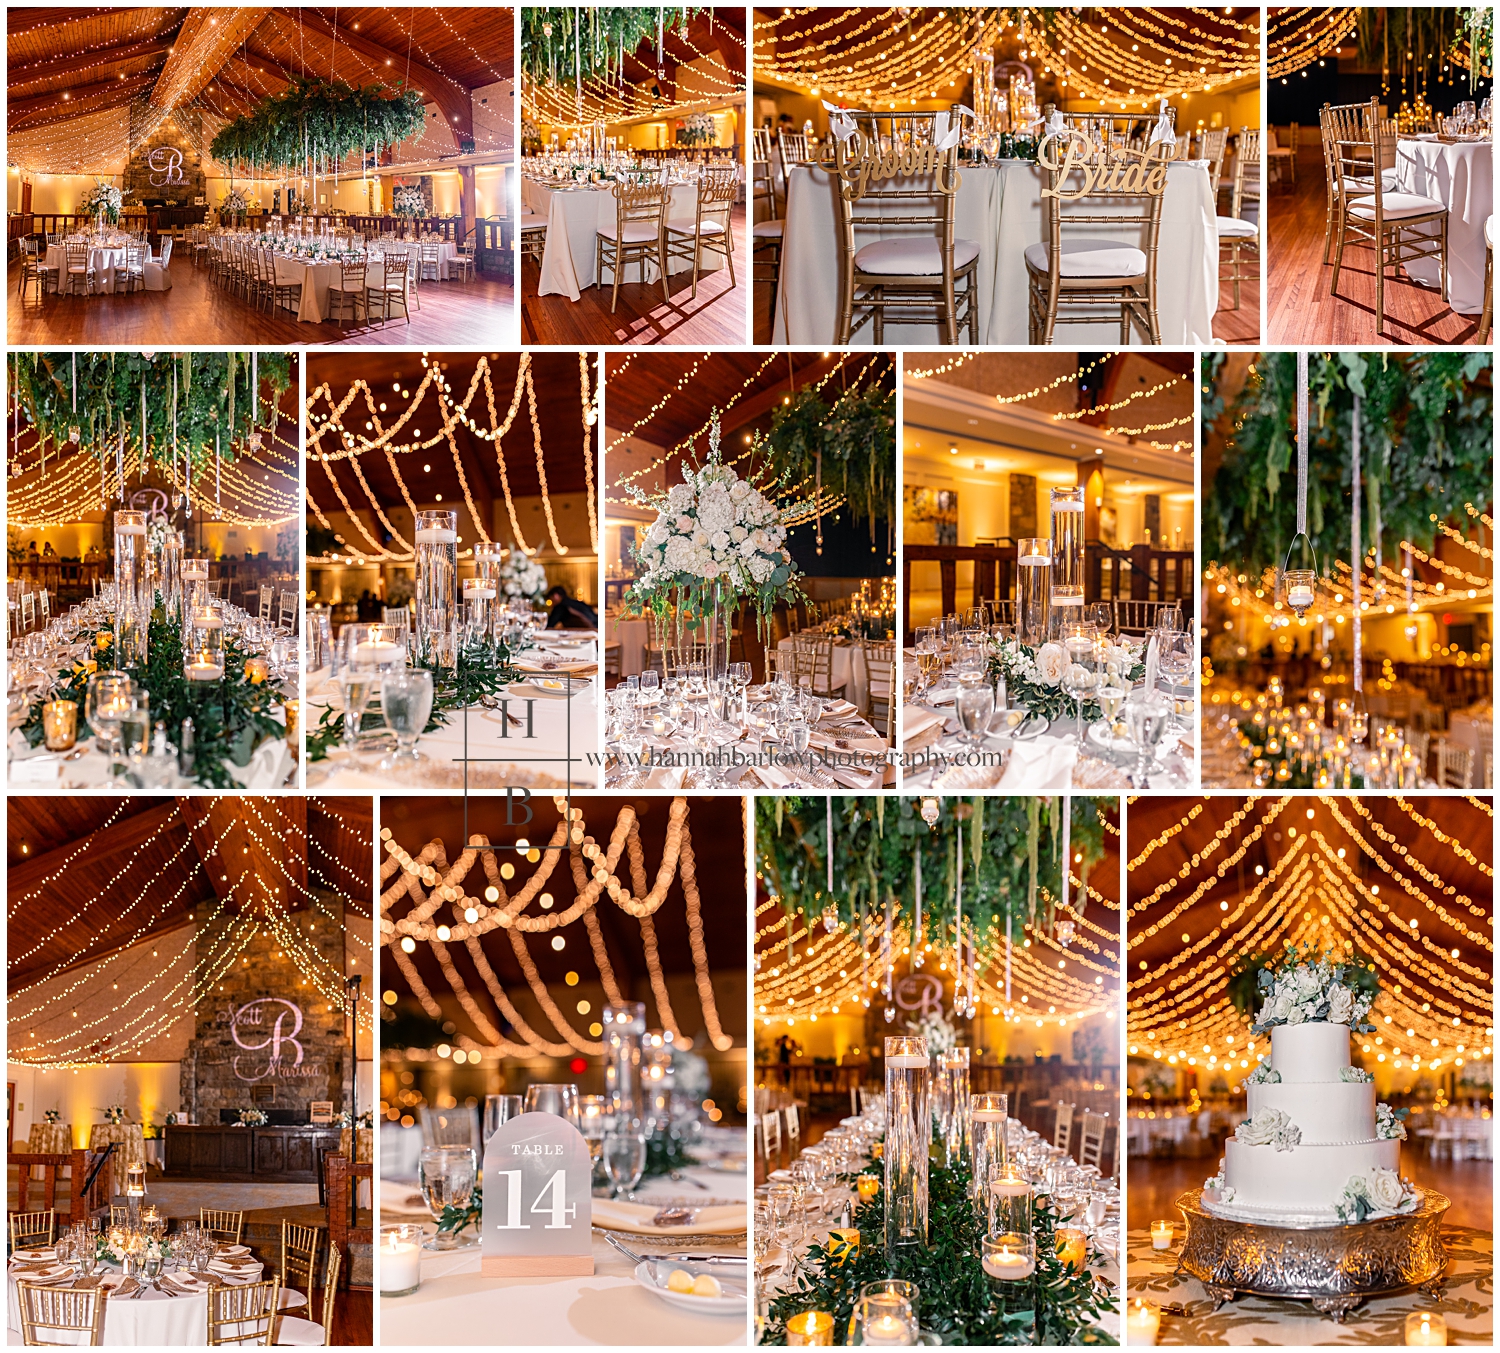 Wedding reception photos featuring gold lights and accents.